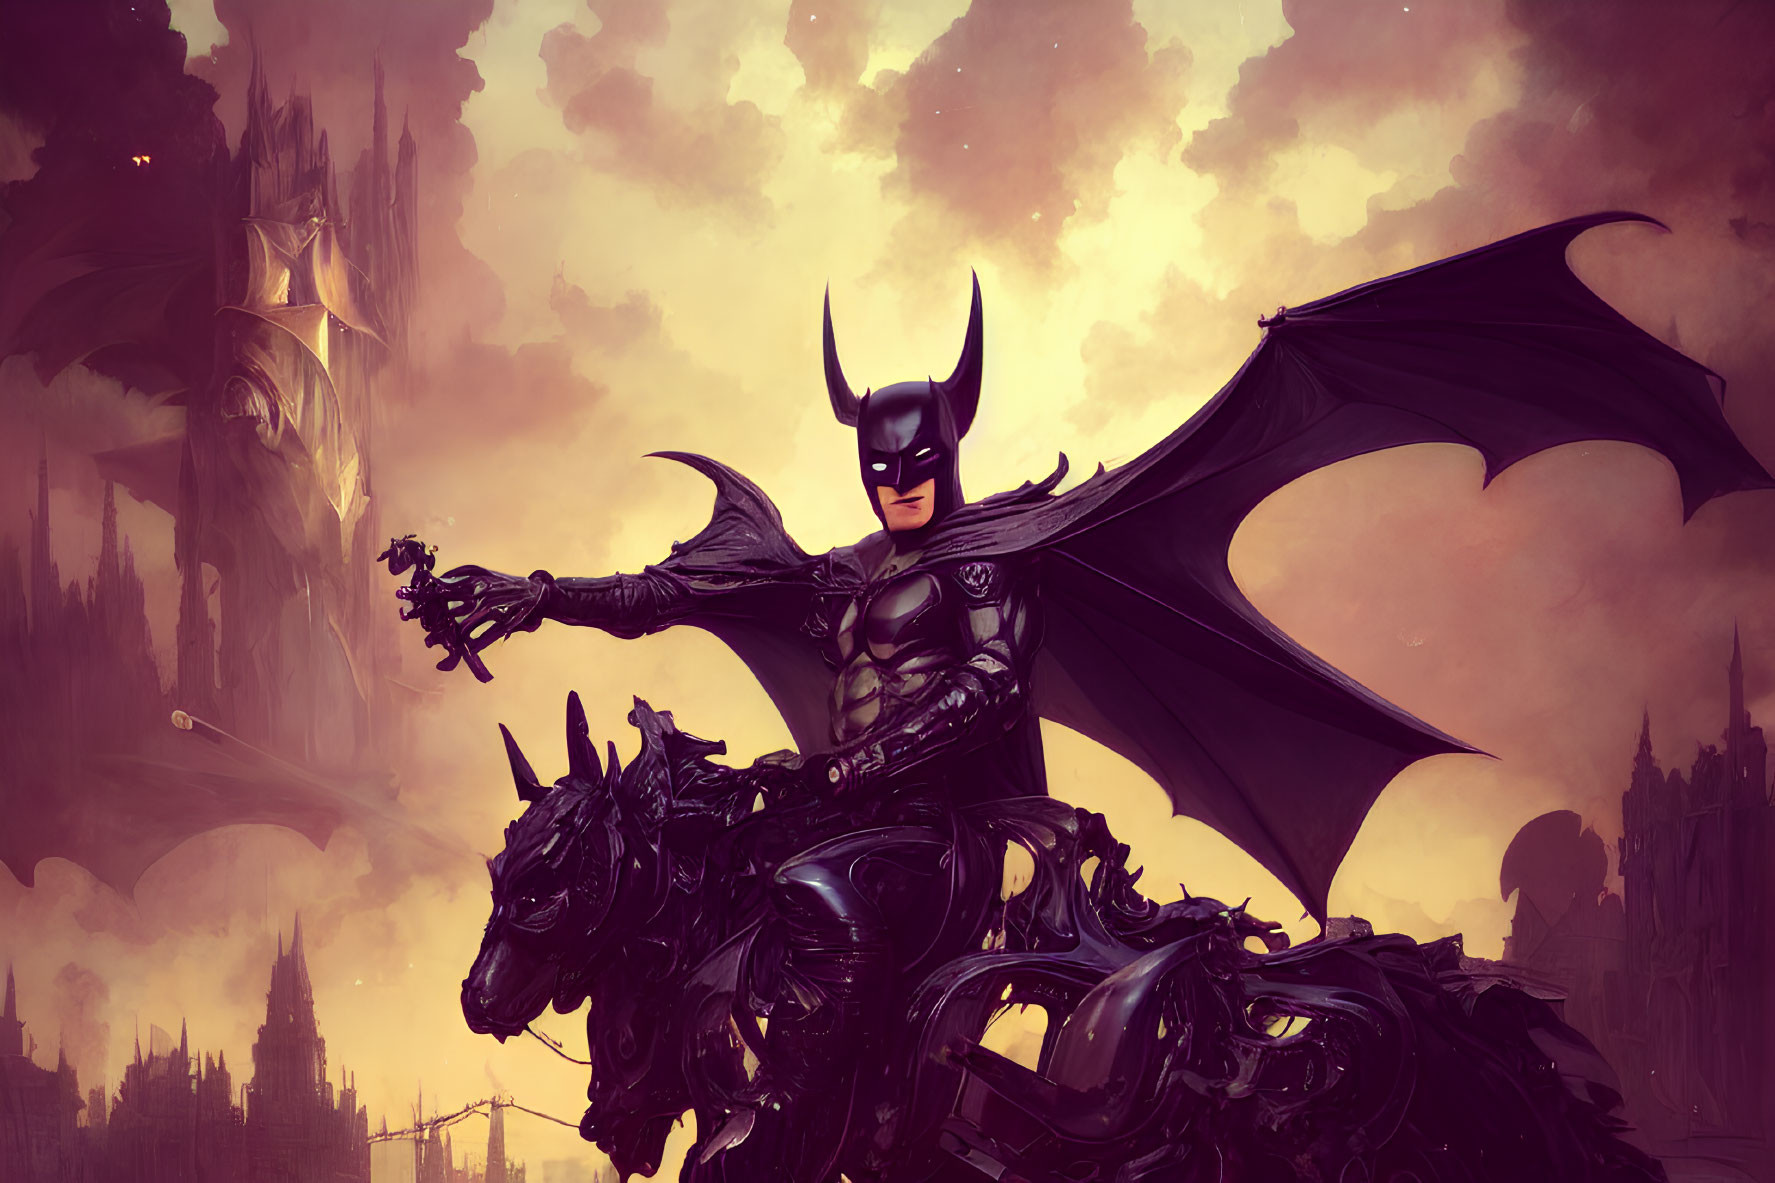 Stylized artwork of caped vigilante on mechanical steed in gothic cityscape